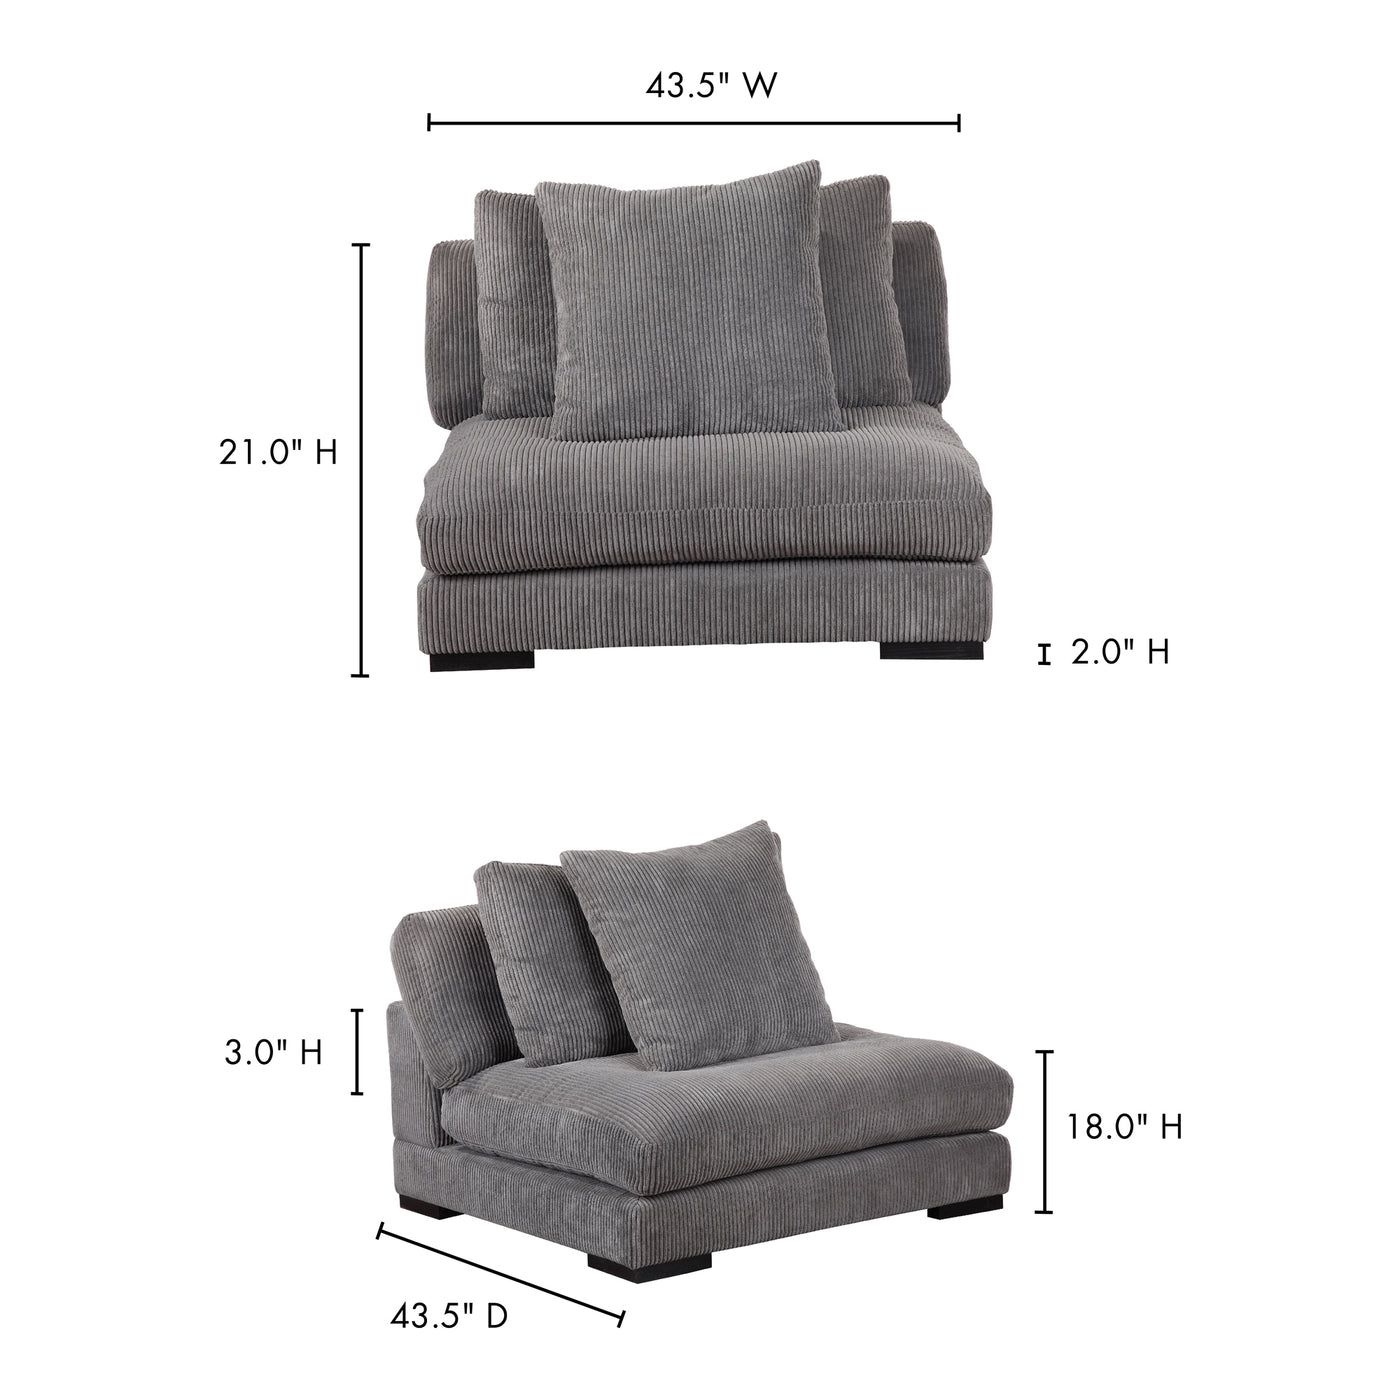 Seriously comfortable, seriously stylish. Either at home or in your commercial space, you can get cozier &amp; cushier usi...